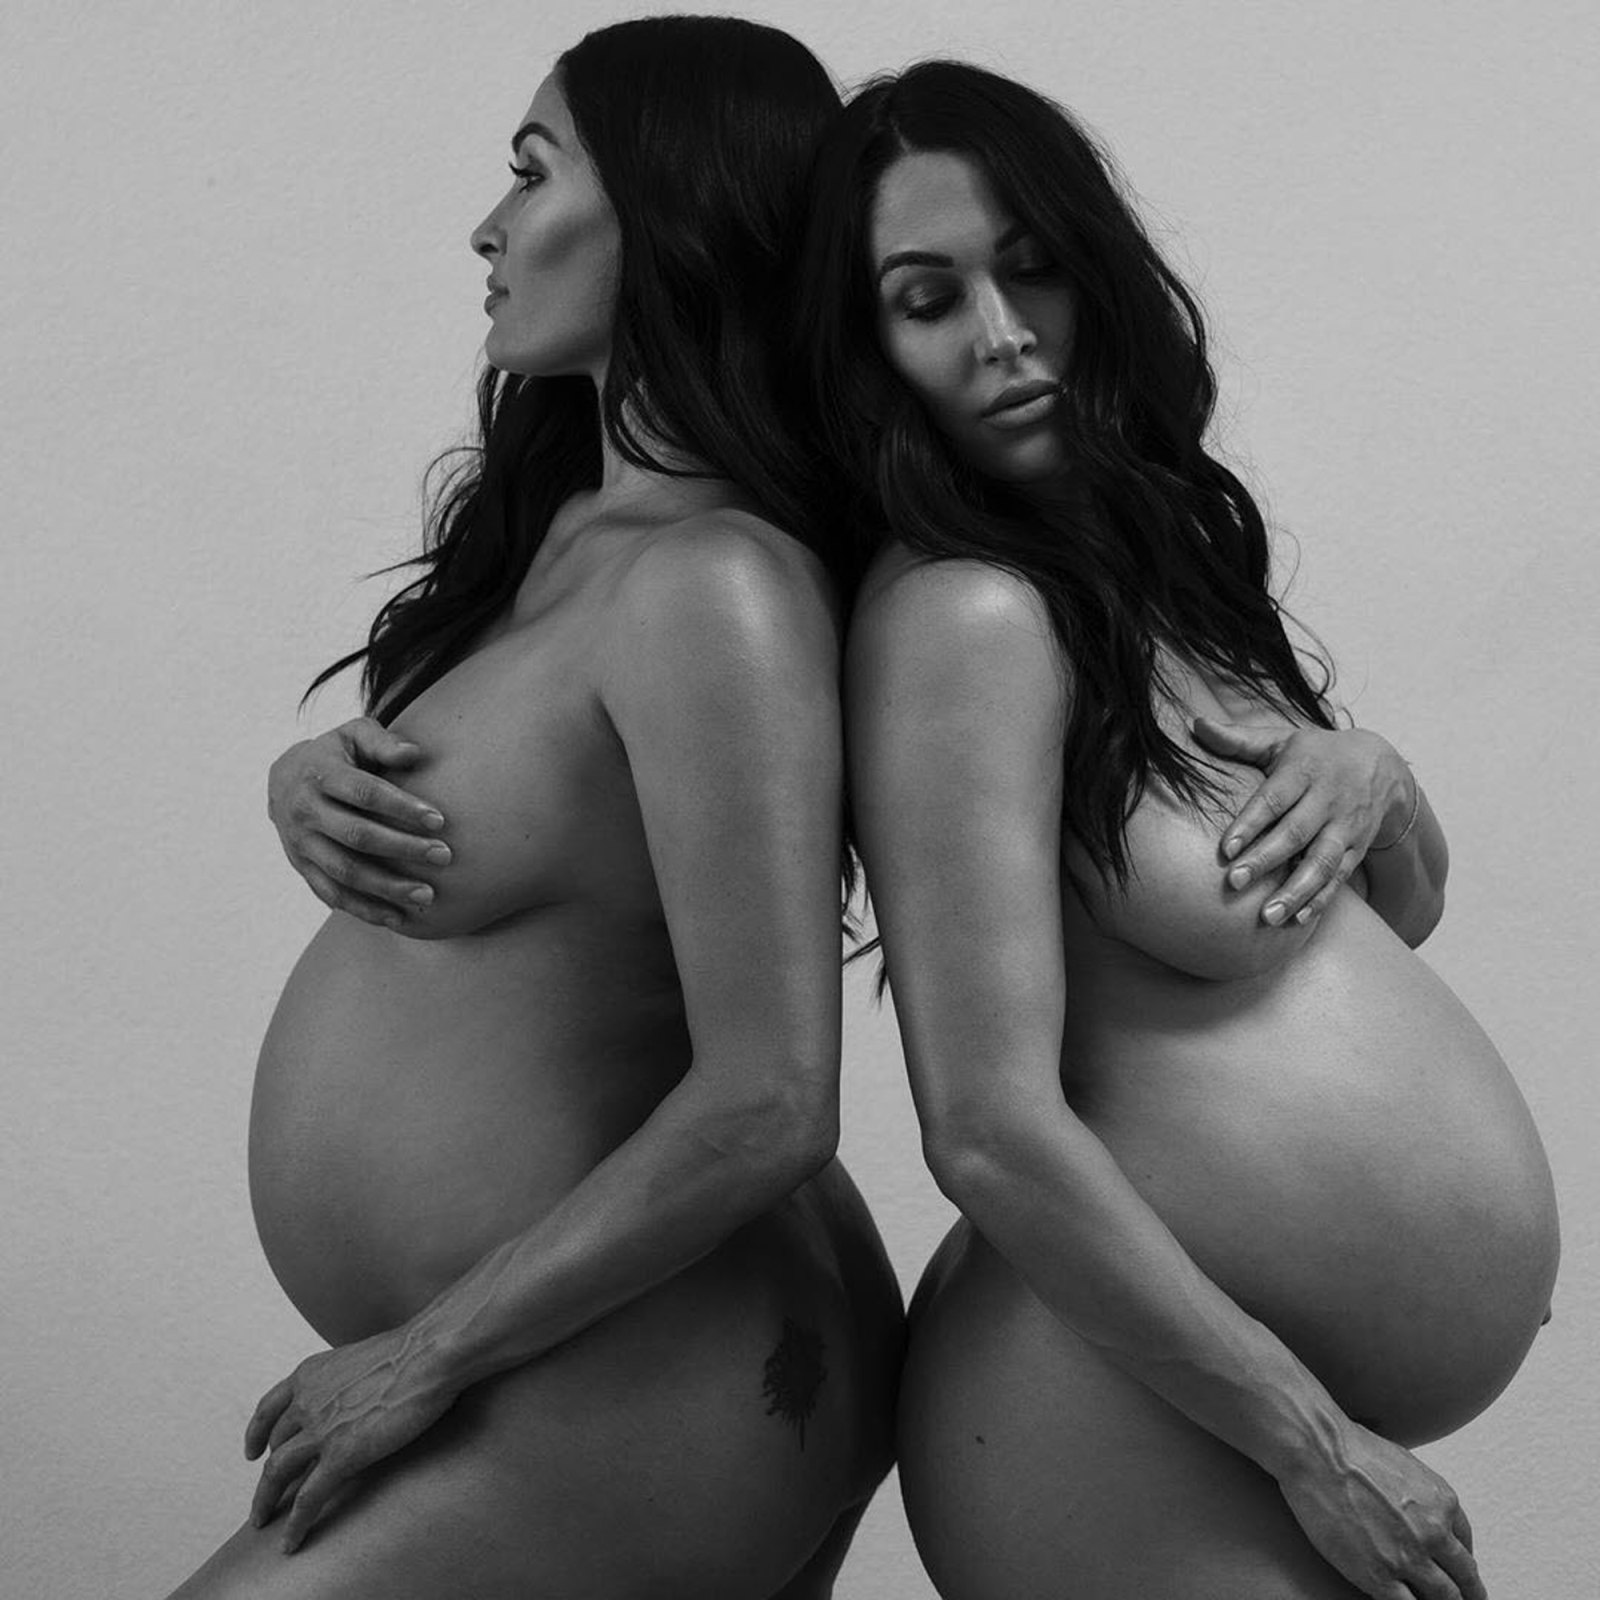 Group Of Naked Pregnant - Pregnant Nikki, Brie Bella Pose Nude Ahead of Birth: Baby Bump Pics